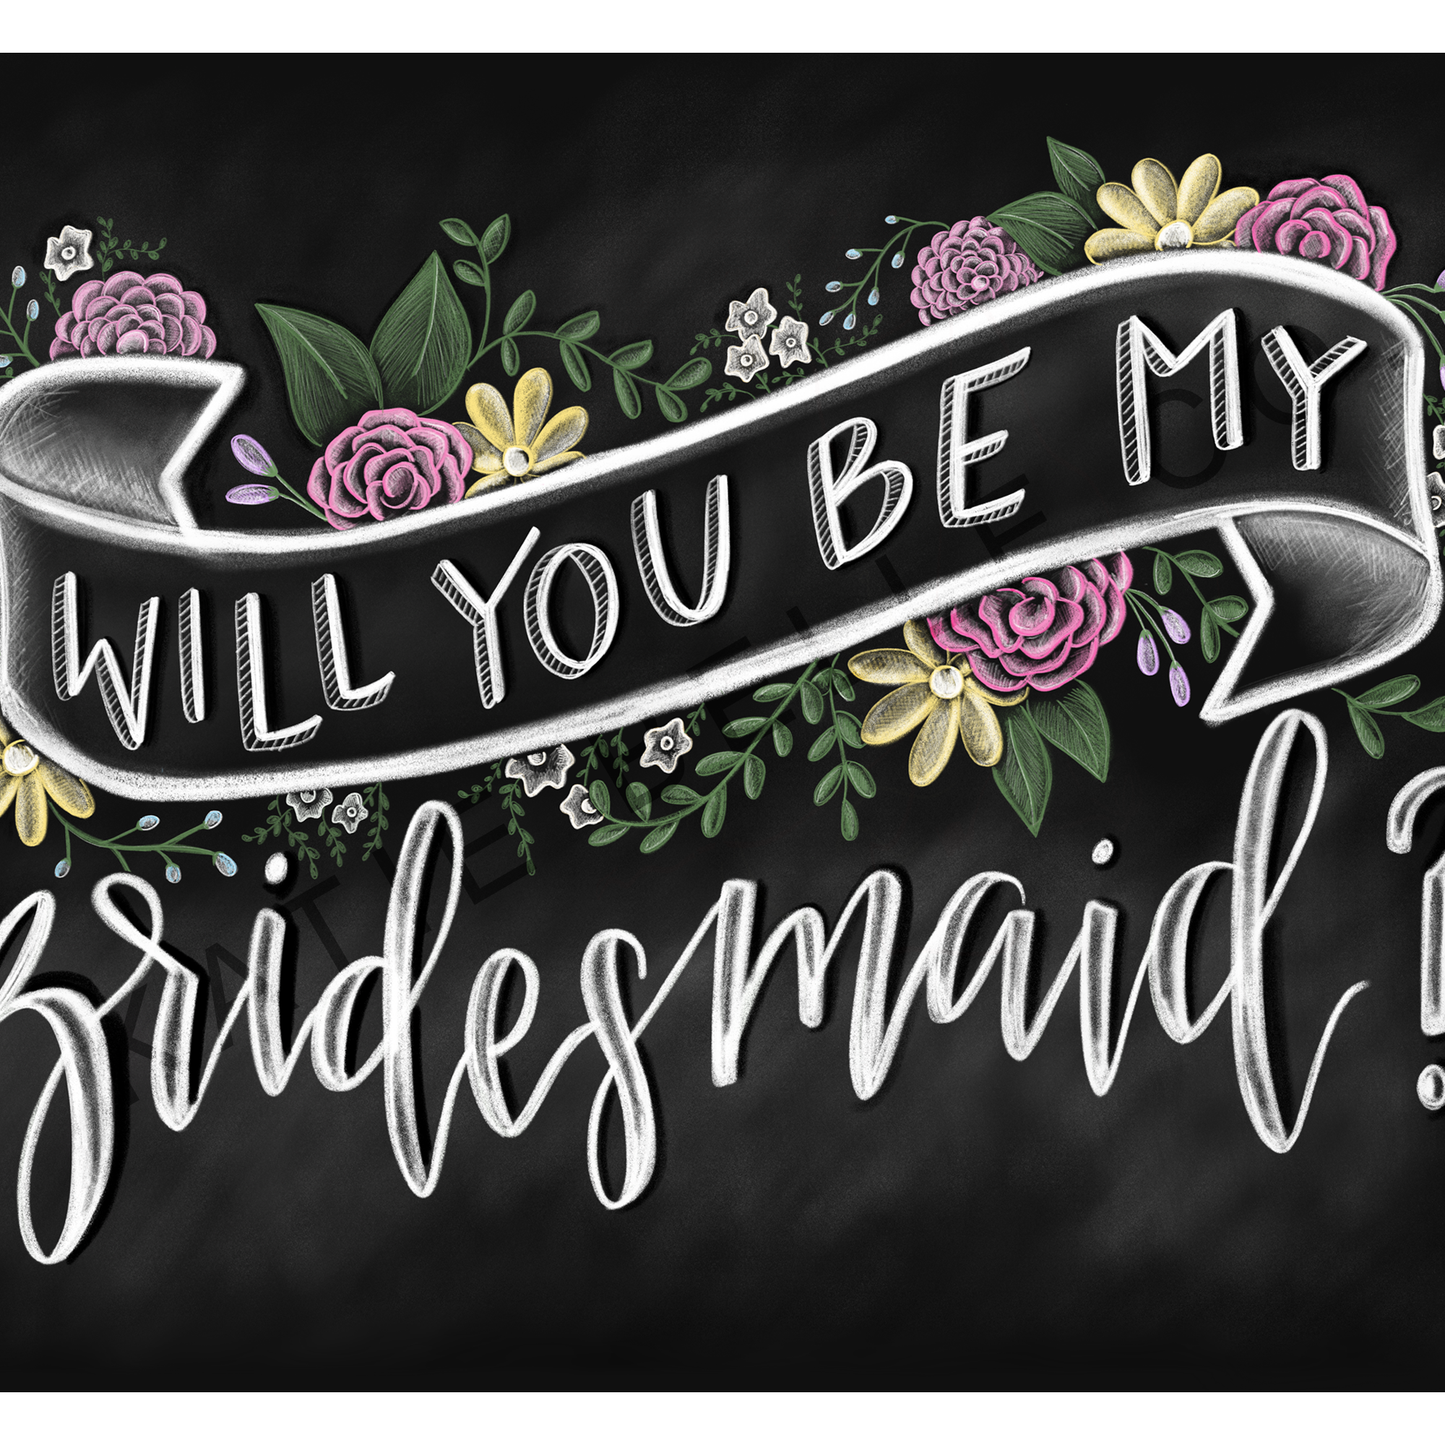 WILL YOU BE MY BRIDESMAID GREETING CARD- Old branding on back side